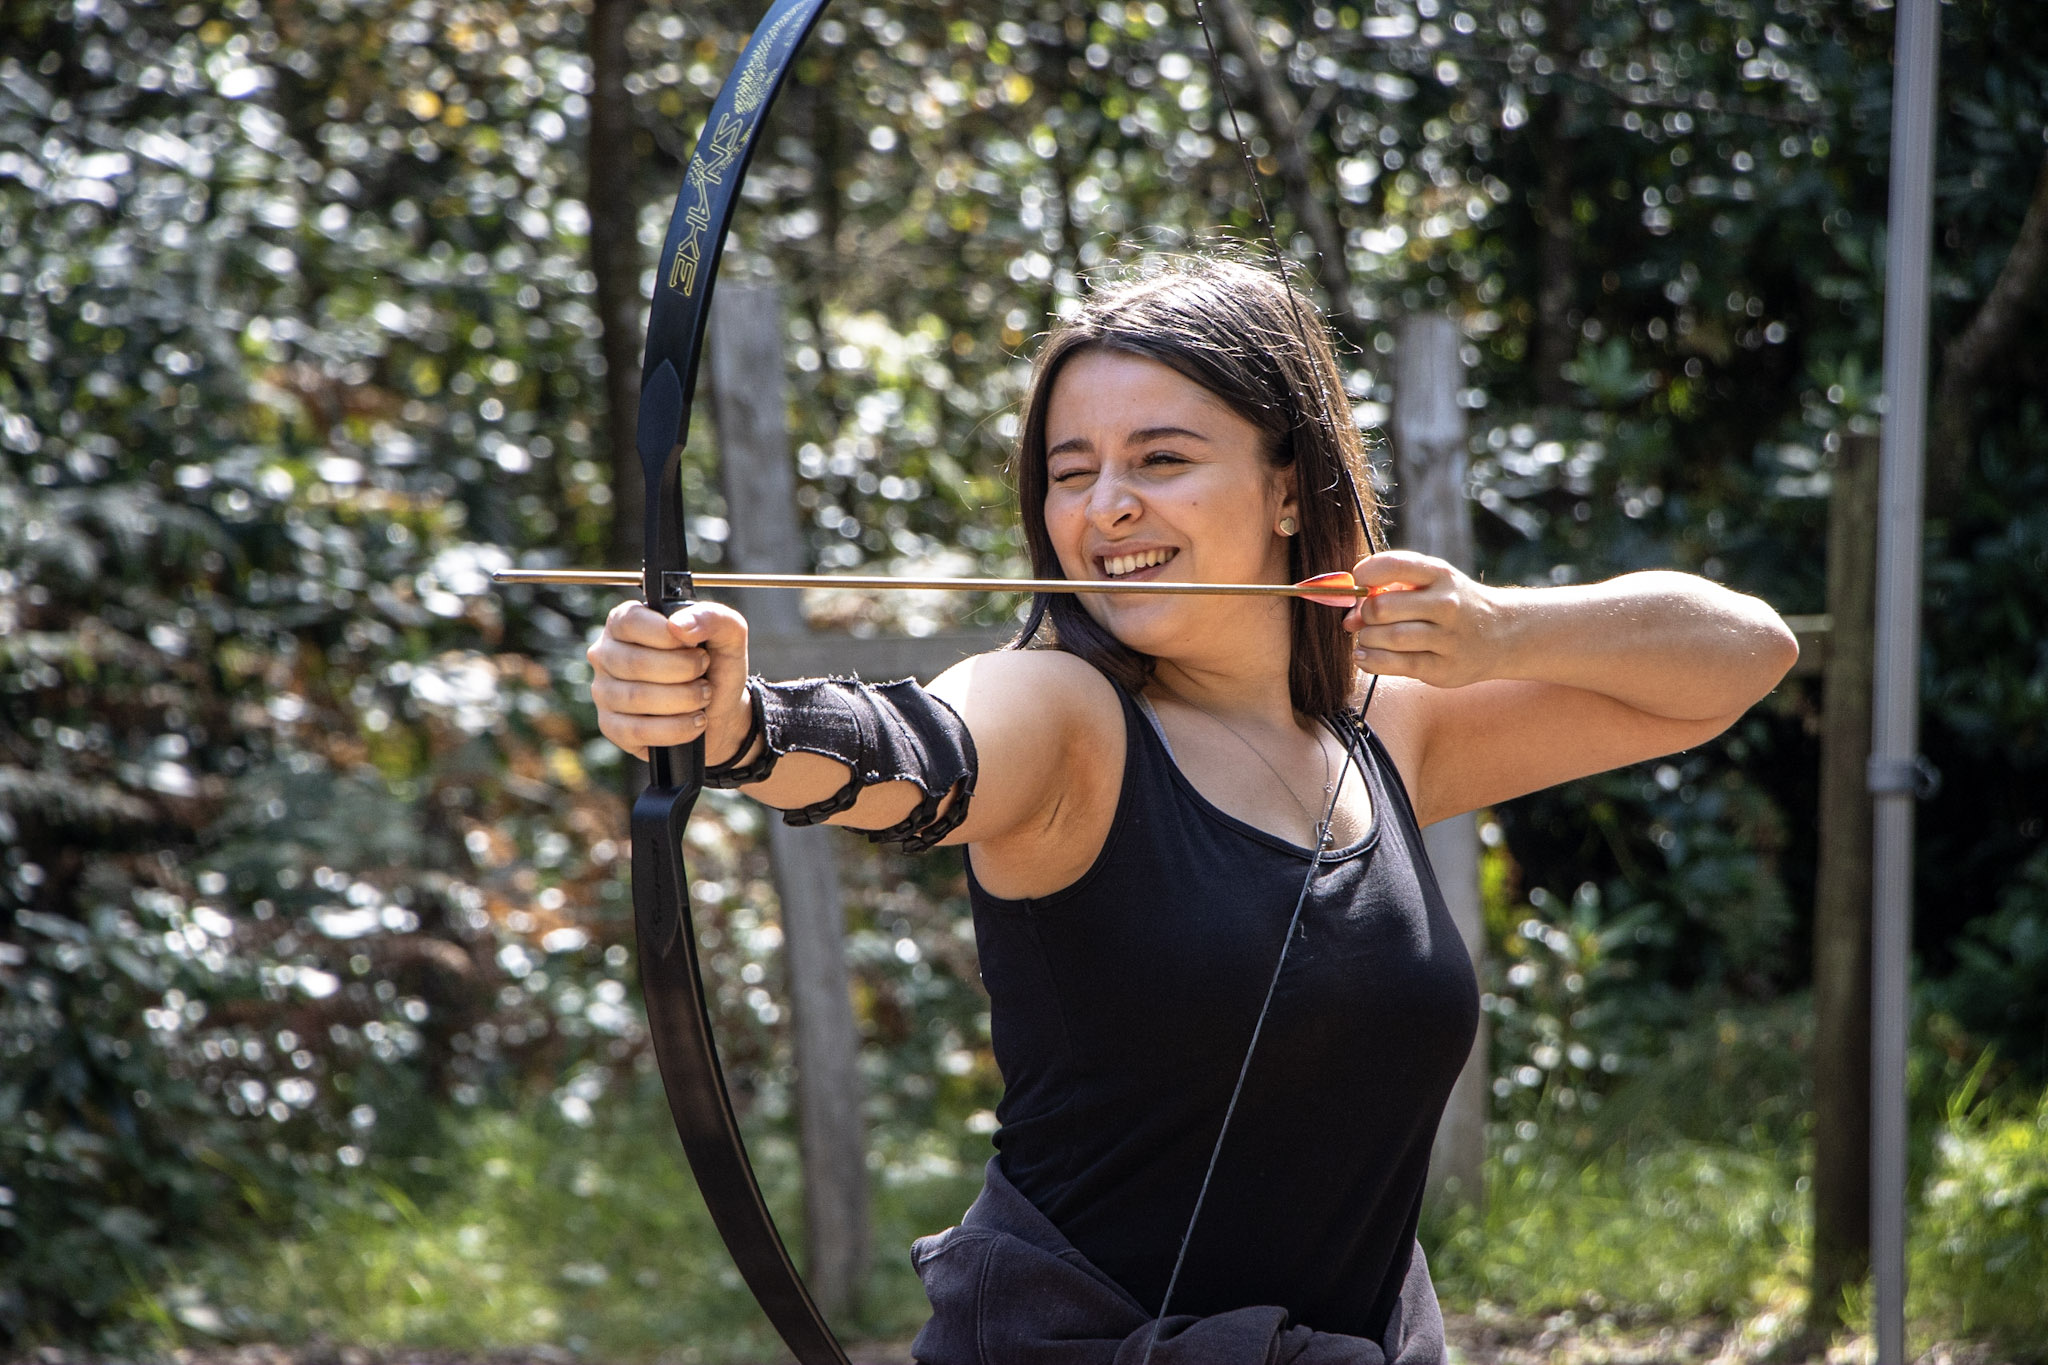 Archery gift experiences available at New Forest Activities